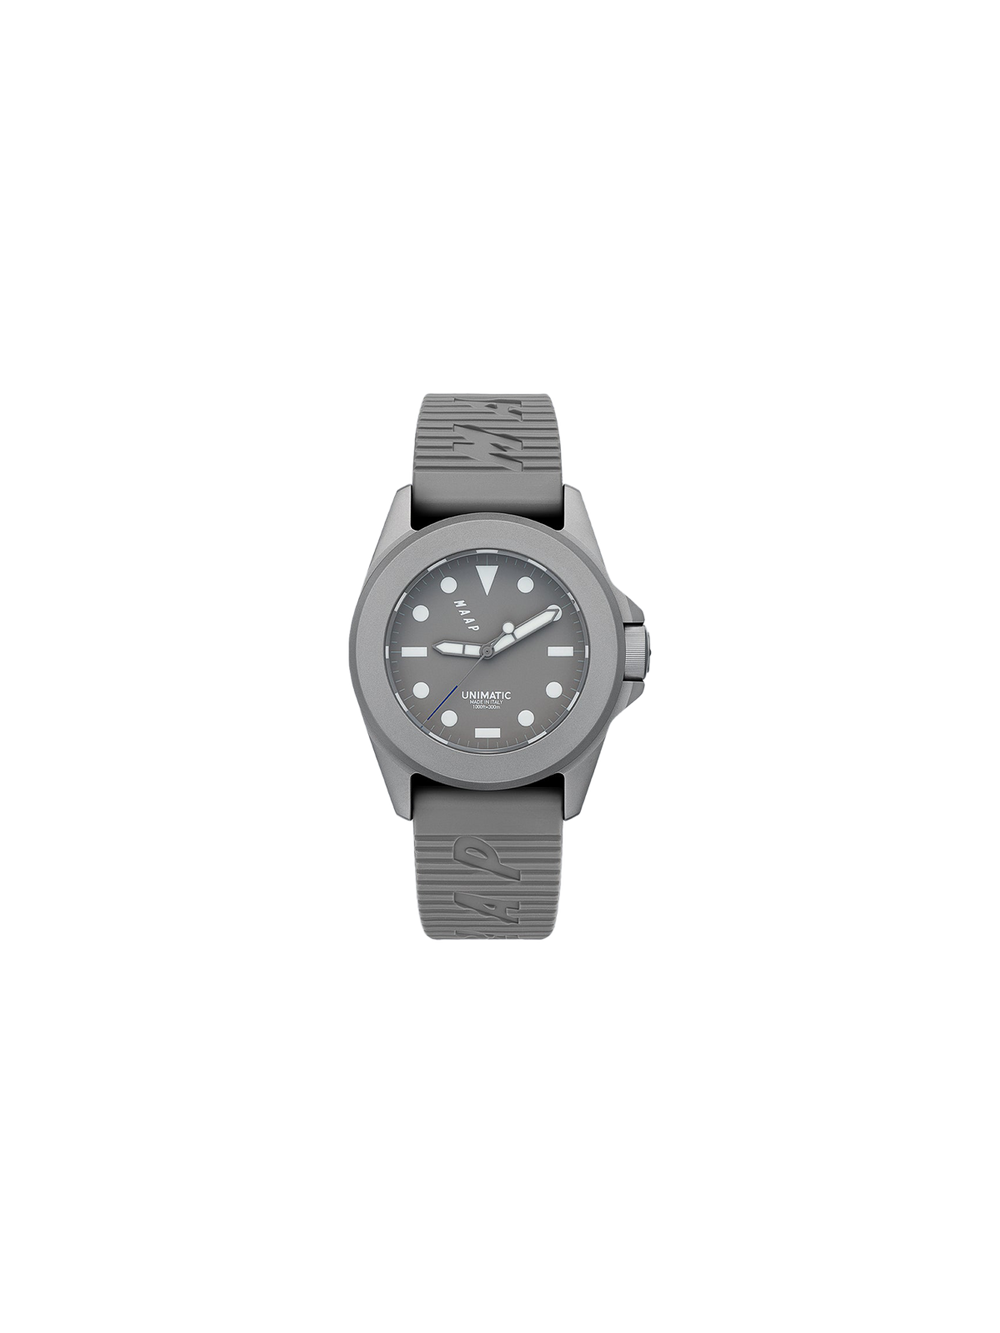 Product Image for Unimatic x MAAP Watch